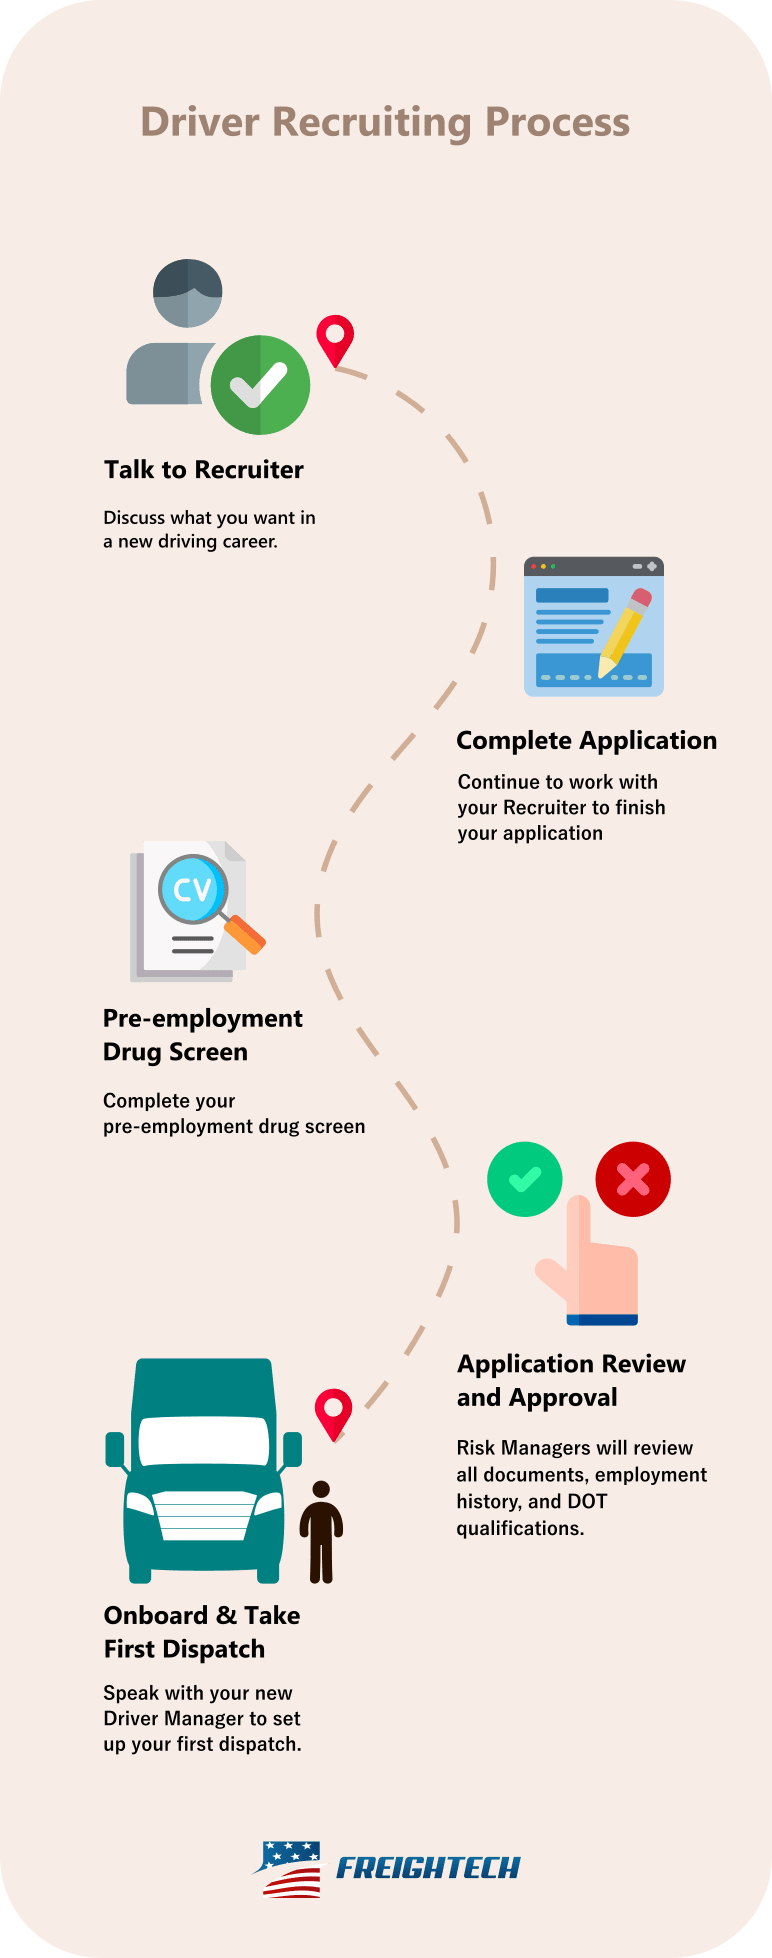 Driver recruiting process infographic